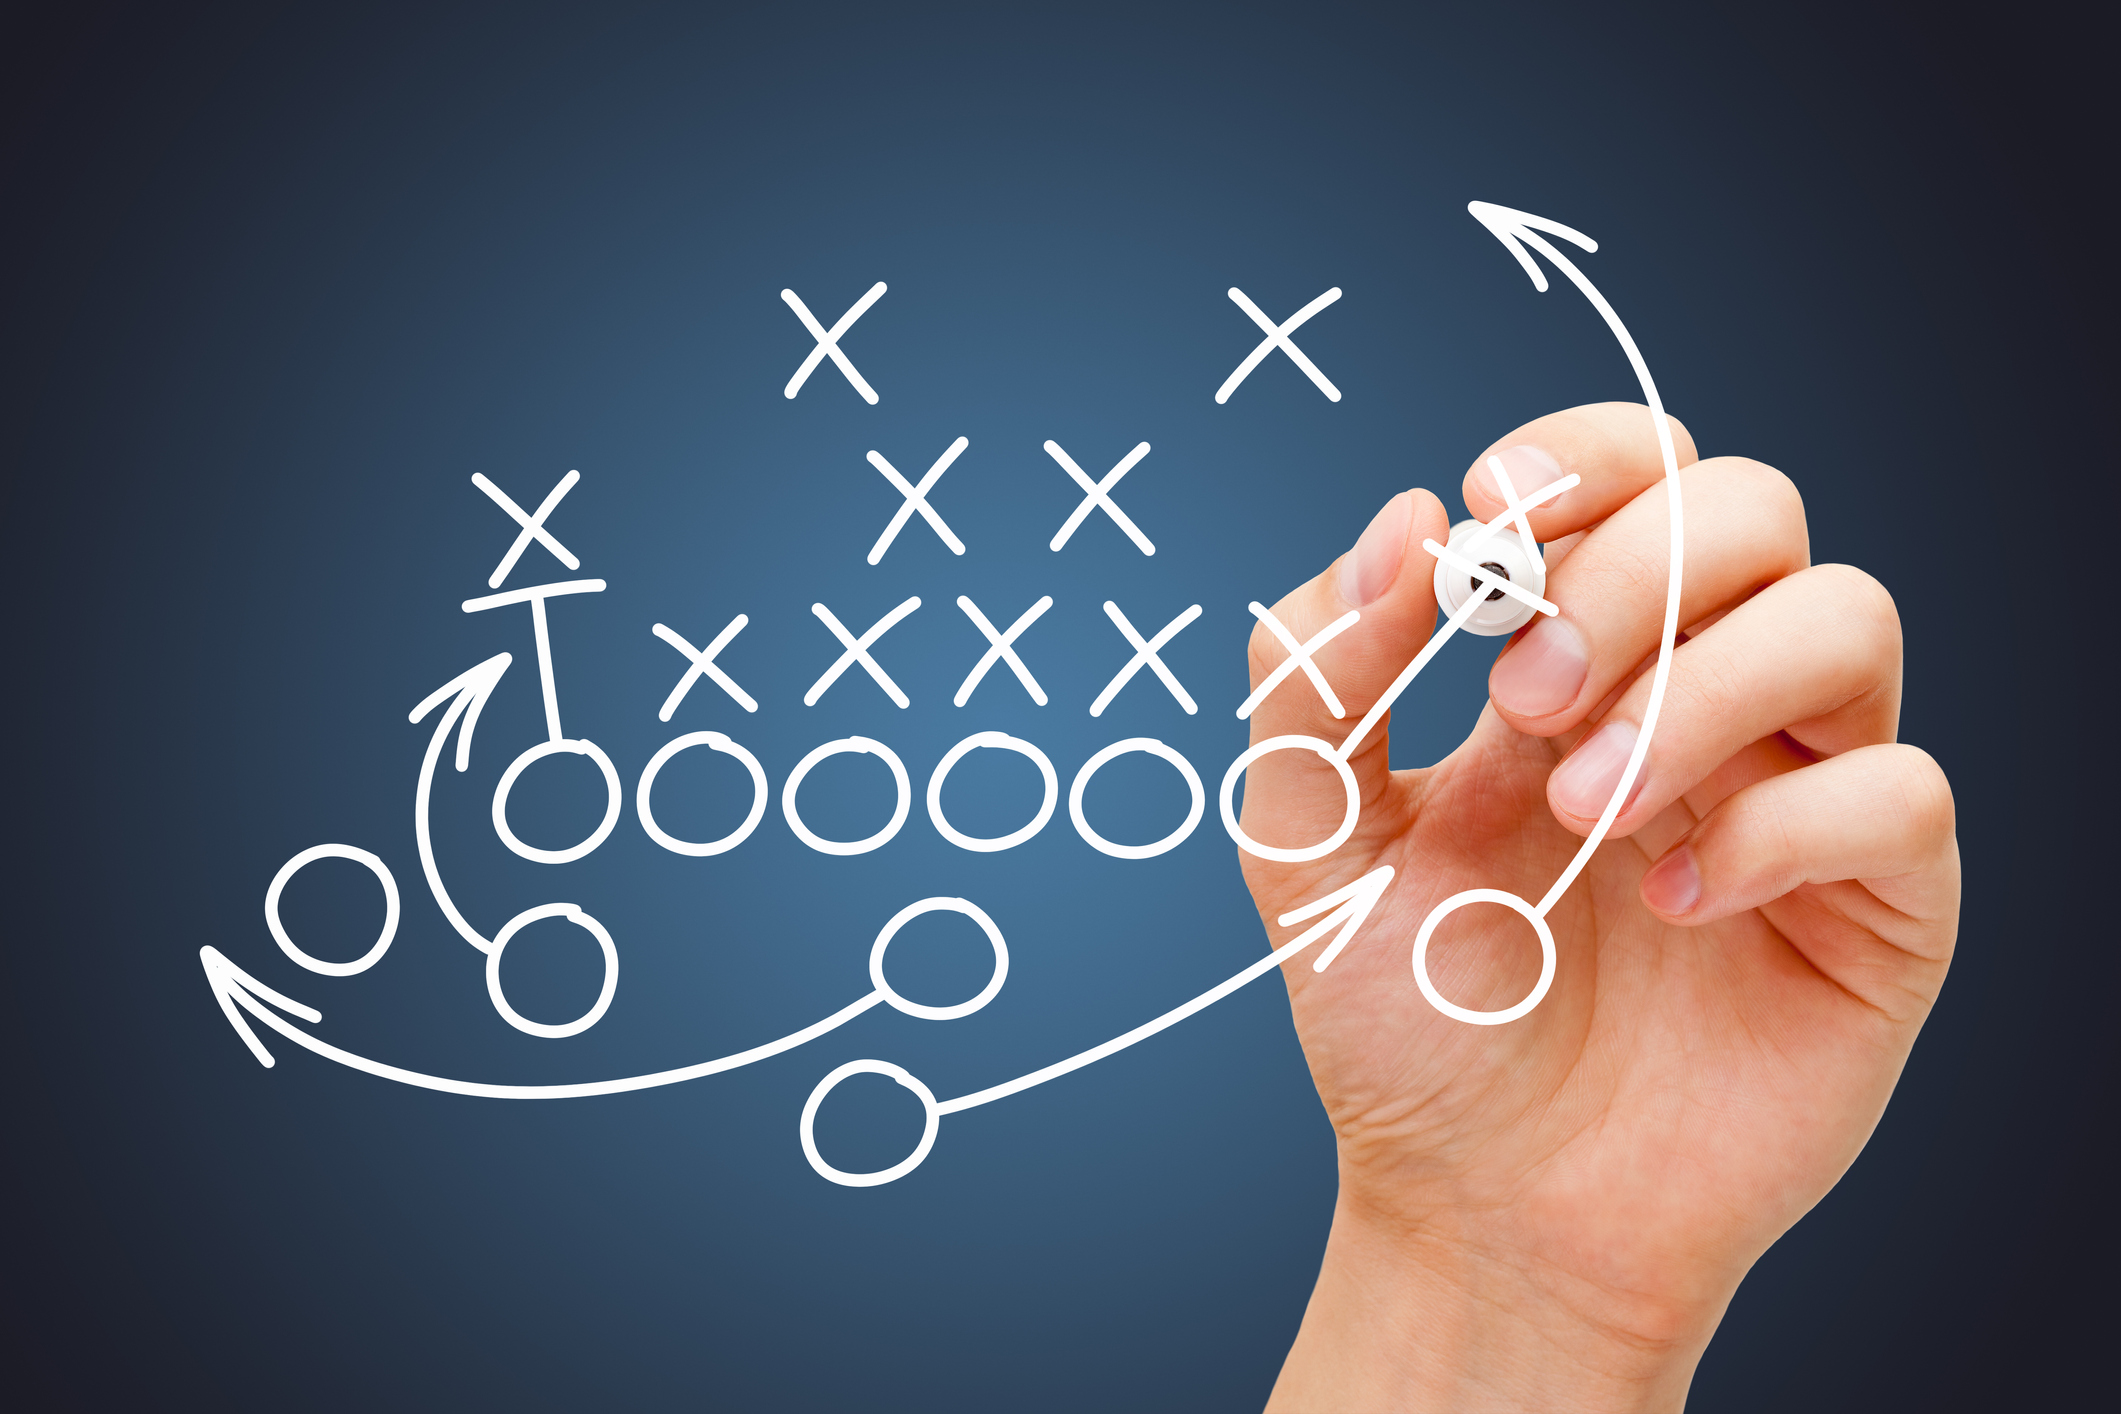 Coach drawing american football or rugby game playbook, strategy and tactics with white marker on blue background.